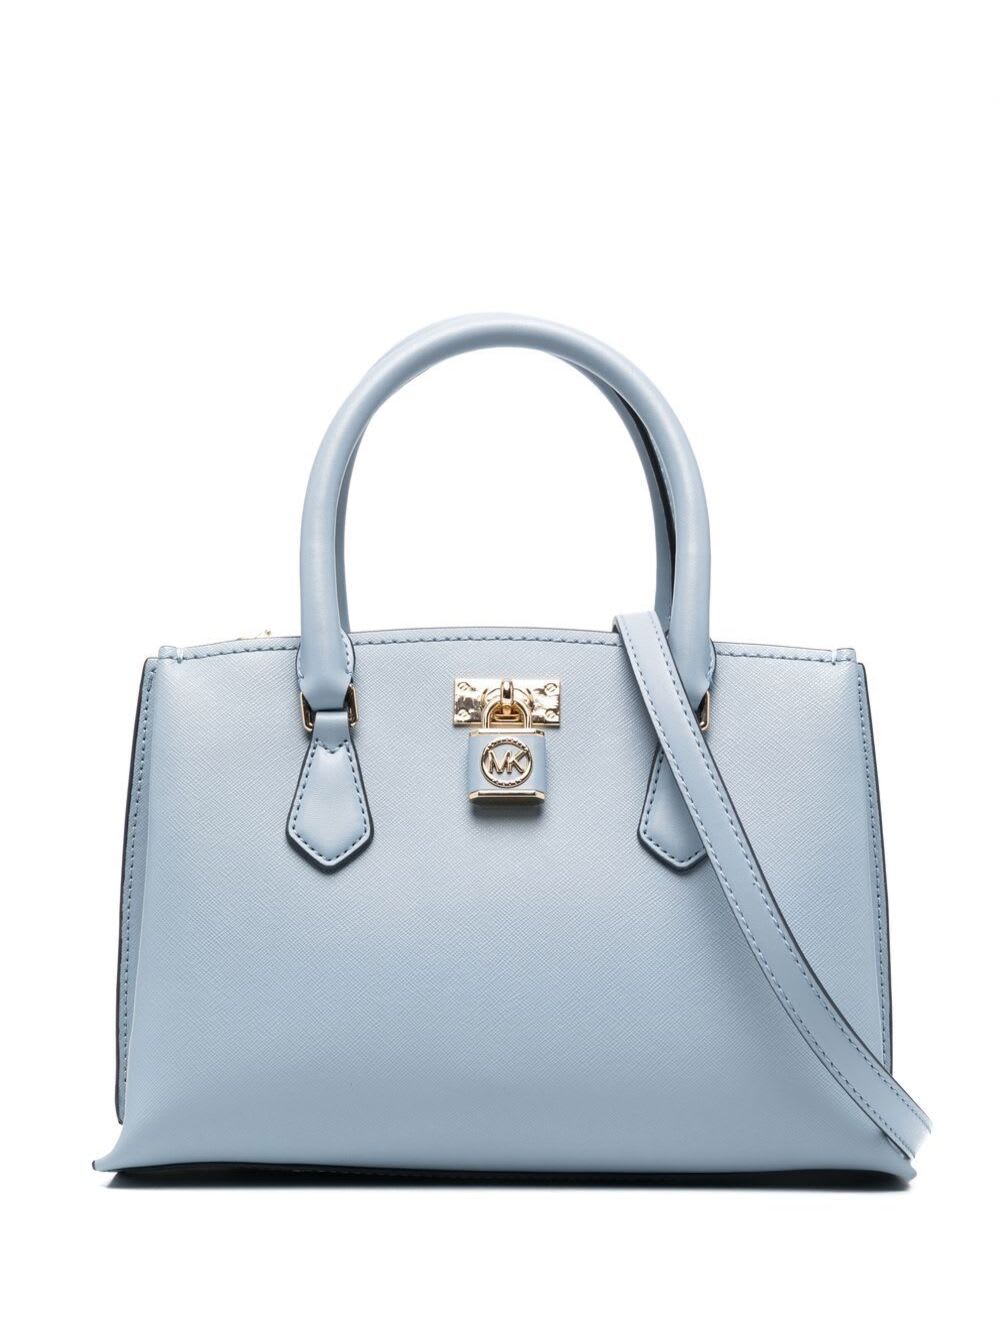 Michael Michael Kors Light Blue Ruby Messenger Bag With Lock Detailing In Saffiano Leather Woman